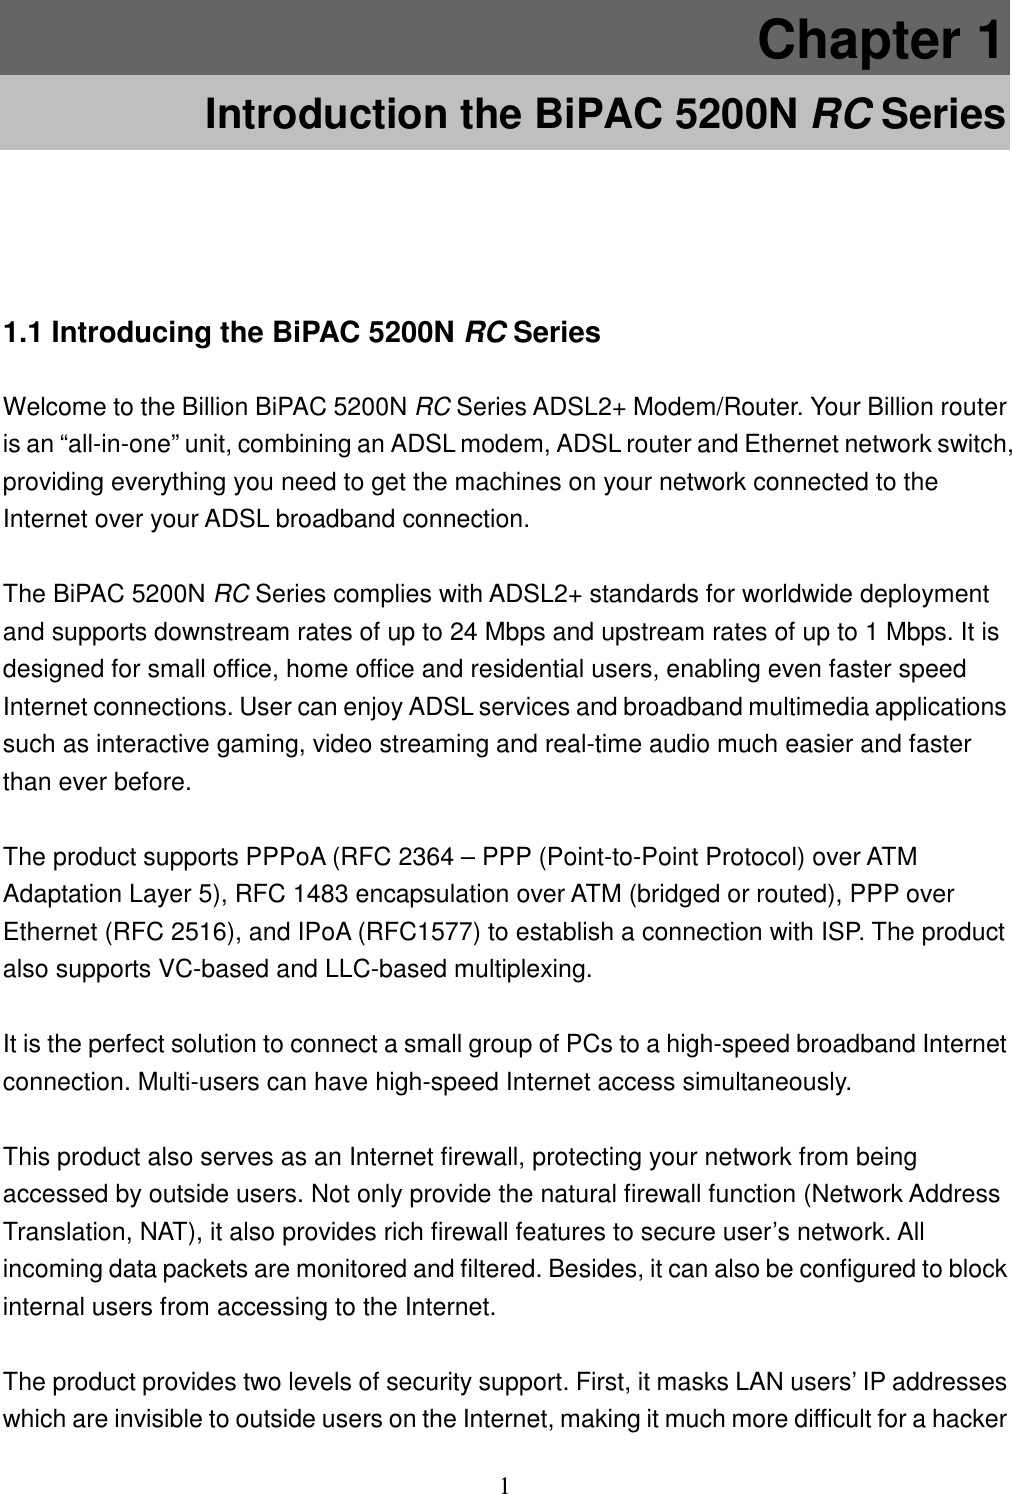 1 Chapter 1 Introduction the BiPAC 5200N RC Series 1.1 Introducing the BiPAC 5200N RC Series Welcome to the Billion BiPAC 5200N RC Series ADSL2+ Modem/Router. Your Billion router is an “all-in-one” unit, combining an ADSL modem, ADSL router and Ethernet network switch, providing everything you need to get the machines on your network connected to the Internet over your ADSL broadband connection.  The BiPAC 5200N RC Series complies with ADSL2+ standards for worldwide deployment and supports downstream rates of up to 24 Mbps and upstream rates of up to 1 Mbps. It is designed for small office, home office and residential users, enabling even faster speed Internet connections. User can enjoy ADSL services and broadband multimedia applications such as interactive gaming, video streaming and real-time audio much easier and faster than ever before.  The product supports PPPoA (RFC 2364 – PPP (Point-to-Point Protocol) over ATM Adaptation Layer 5), RFC 1483 encapsulation over ATM (bridged or routed), PPP over Ethernet (RFC 2516), and IPoA (RFC1577) to establish a connection with ISP. The product also supports VC-based and LLC-based multiplexing.  It is the perfect solution to connect a small group of PCs to a high-speed broadband Internet connection. Multi-users can have high-speed Internet access simultaneously.   This product also serves as an Internet firewall, protecting your network from being accessed by outside users. Not only provide the natural firewall function (Network Address Translation, NAT), it also provides rich firewall features to secure user’s network. All incoming data packets are monitored and filtered. Besides, it can also be configured to block internal users from accessing to the Internet.  The product provides two levels of security support. First, it masks LAN users’ IP addresses which are invisible to outside users on the Internet, making it much more difficult for a hacker 